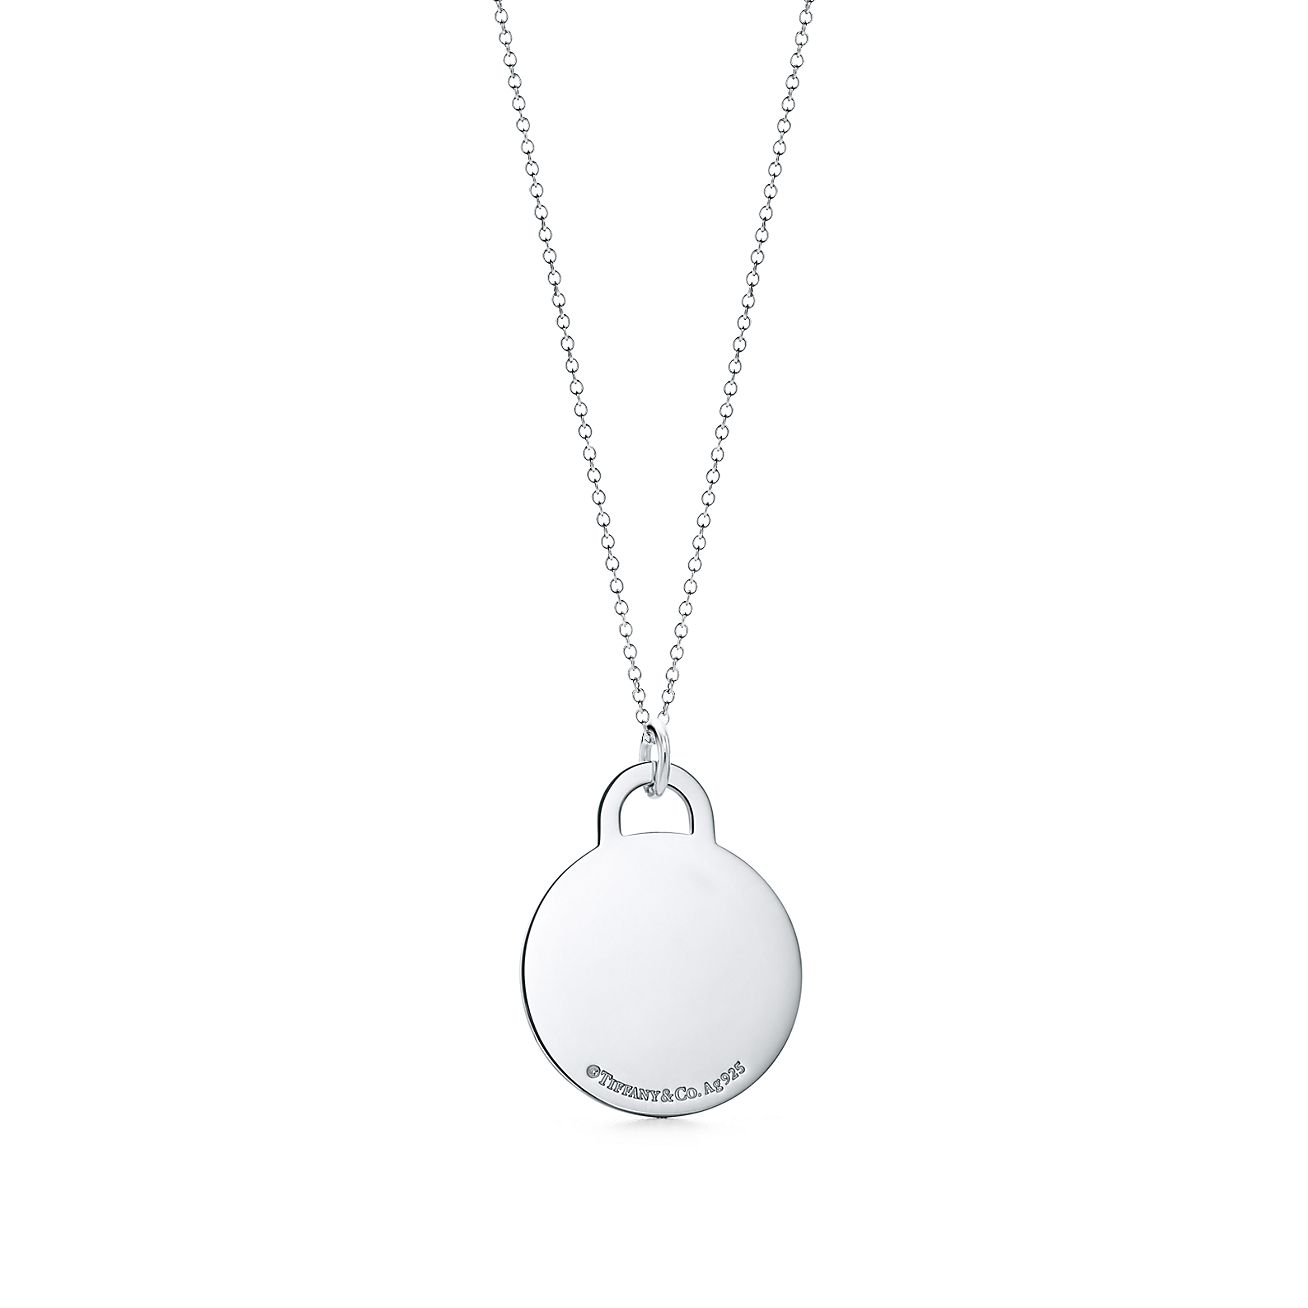 tiffany and co round tag necklace